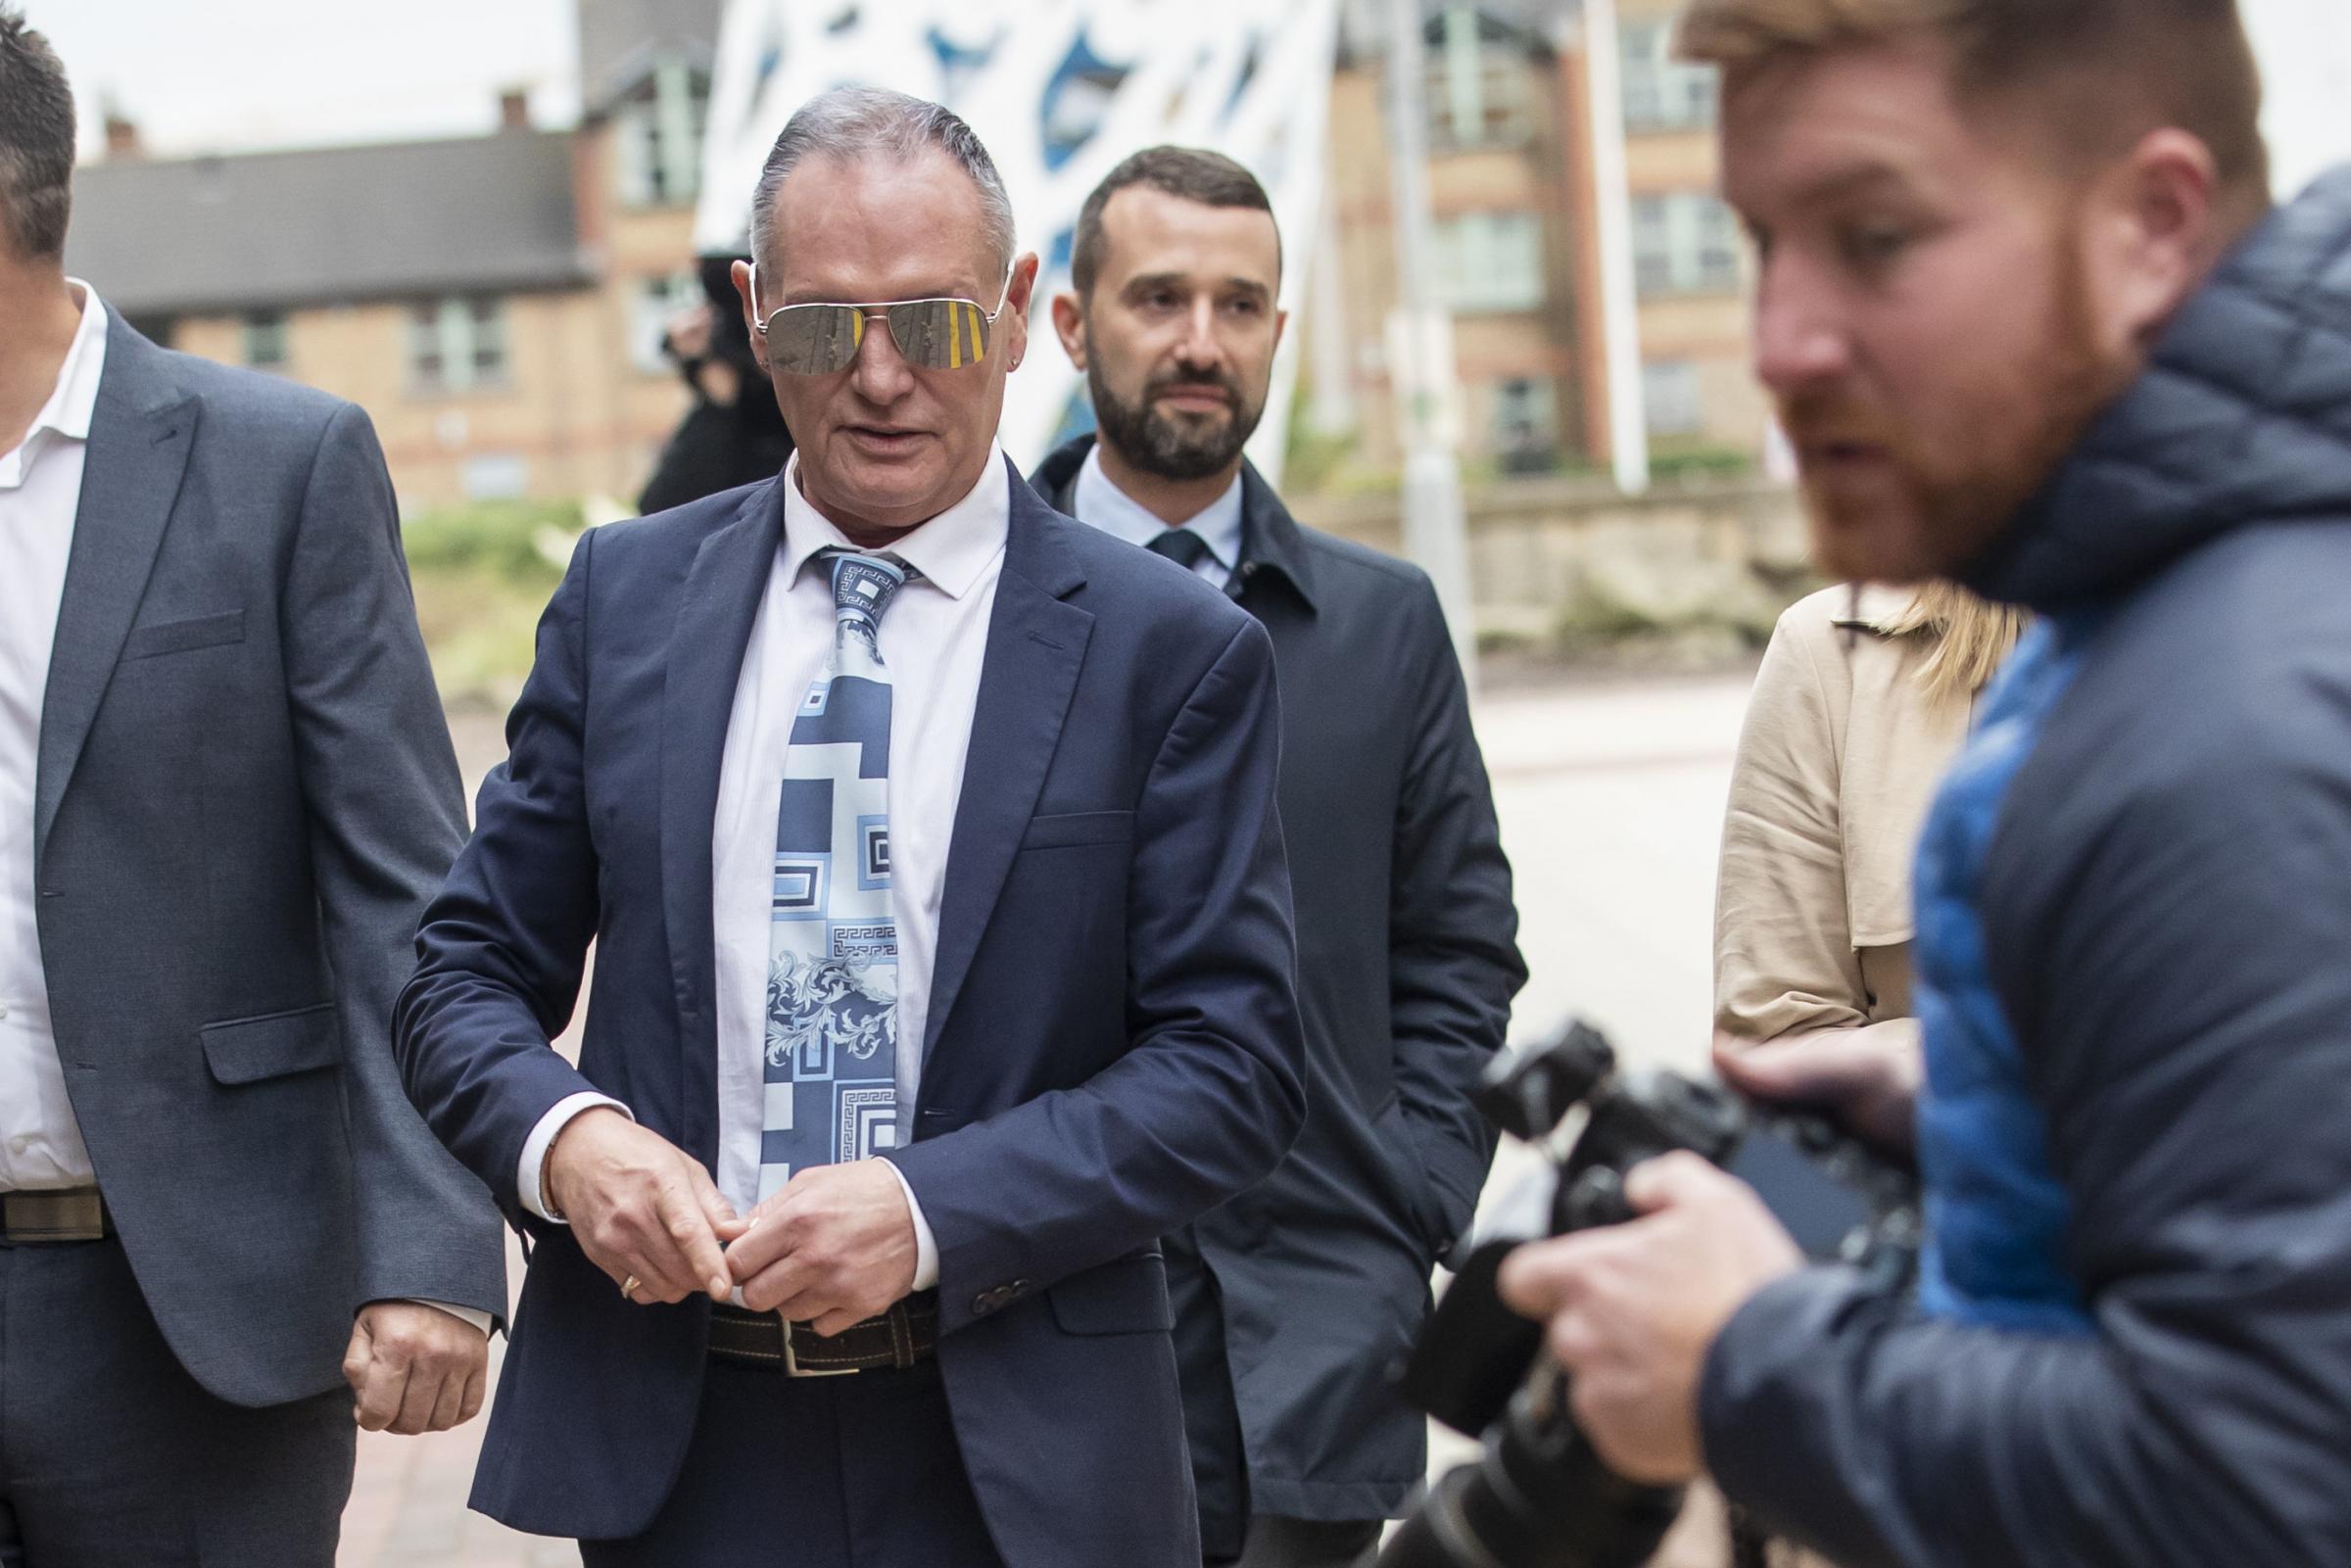 Jurors in sexual assault trial shown pictures of Gascoigne kisses